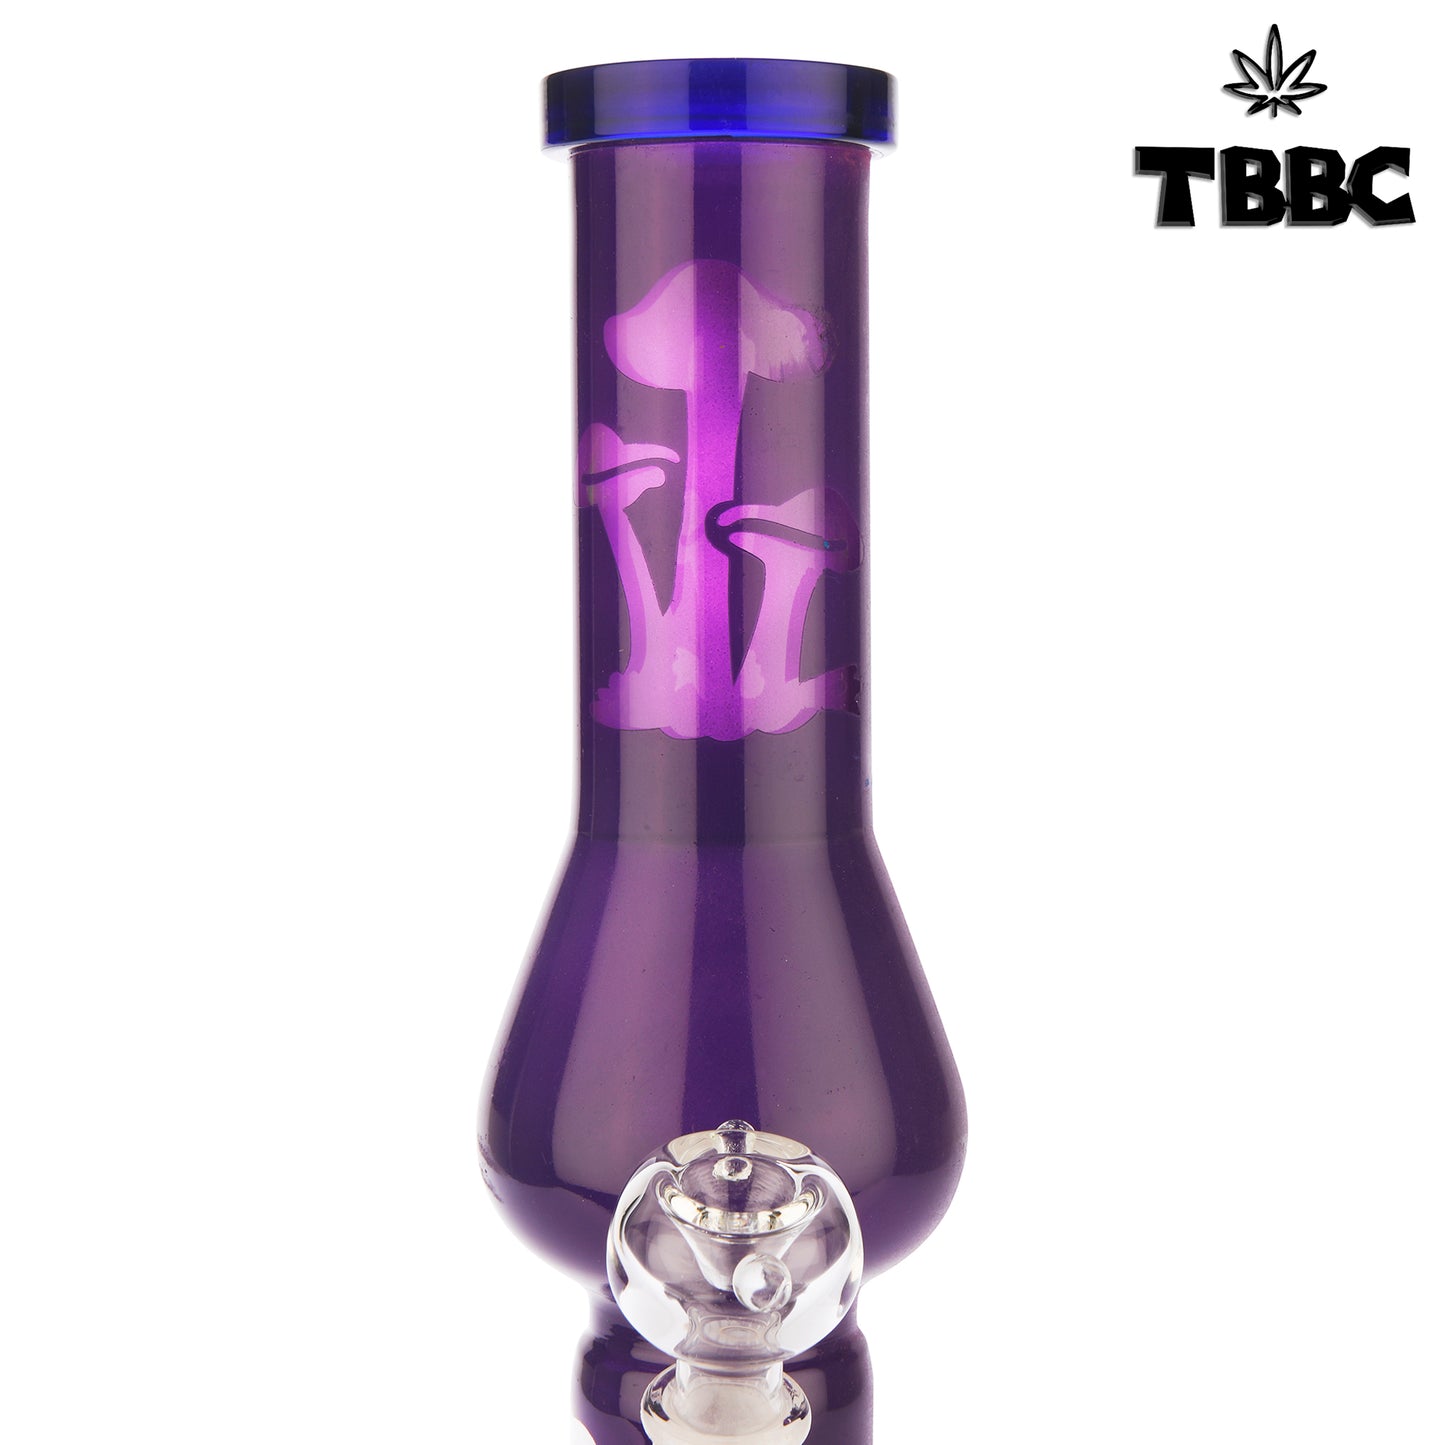 Glass bong with ice catcher Delhi NCR, Medium-sized glass bong fast delivery, Efficient percolator bong India delivery, Heavy-duty glass bong Delhi instant, Ice-cooling bong express delivery, Percolator bong shop Delhi NCR, Top-rated percolator bongs India express, Medium bong with percolator delivery, Premium glass bongs Delhi NCR, Percolator bongs for sale fast delivery, Glass water pipe with ice catcher India, Best ice percolator bong Delhi NCR, Ice catcher glass water pipe express delivery